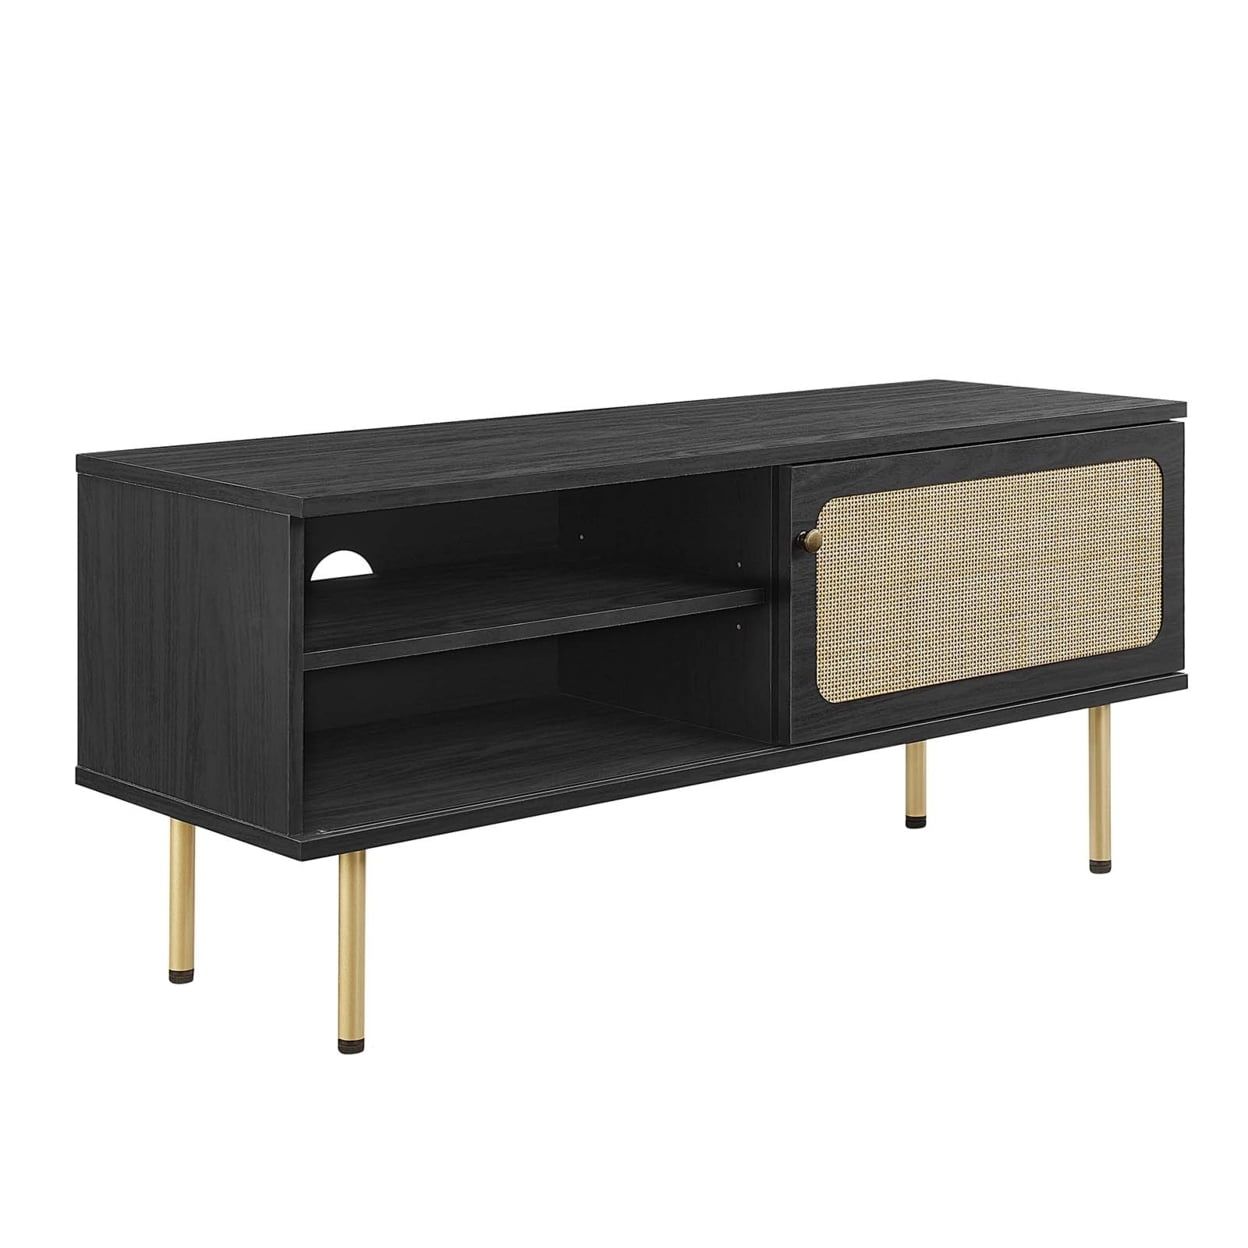 Cambria 47" Black Particleboard TV Stand with Rattan Weave